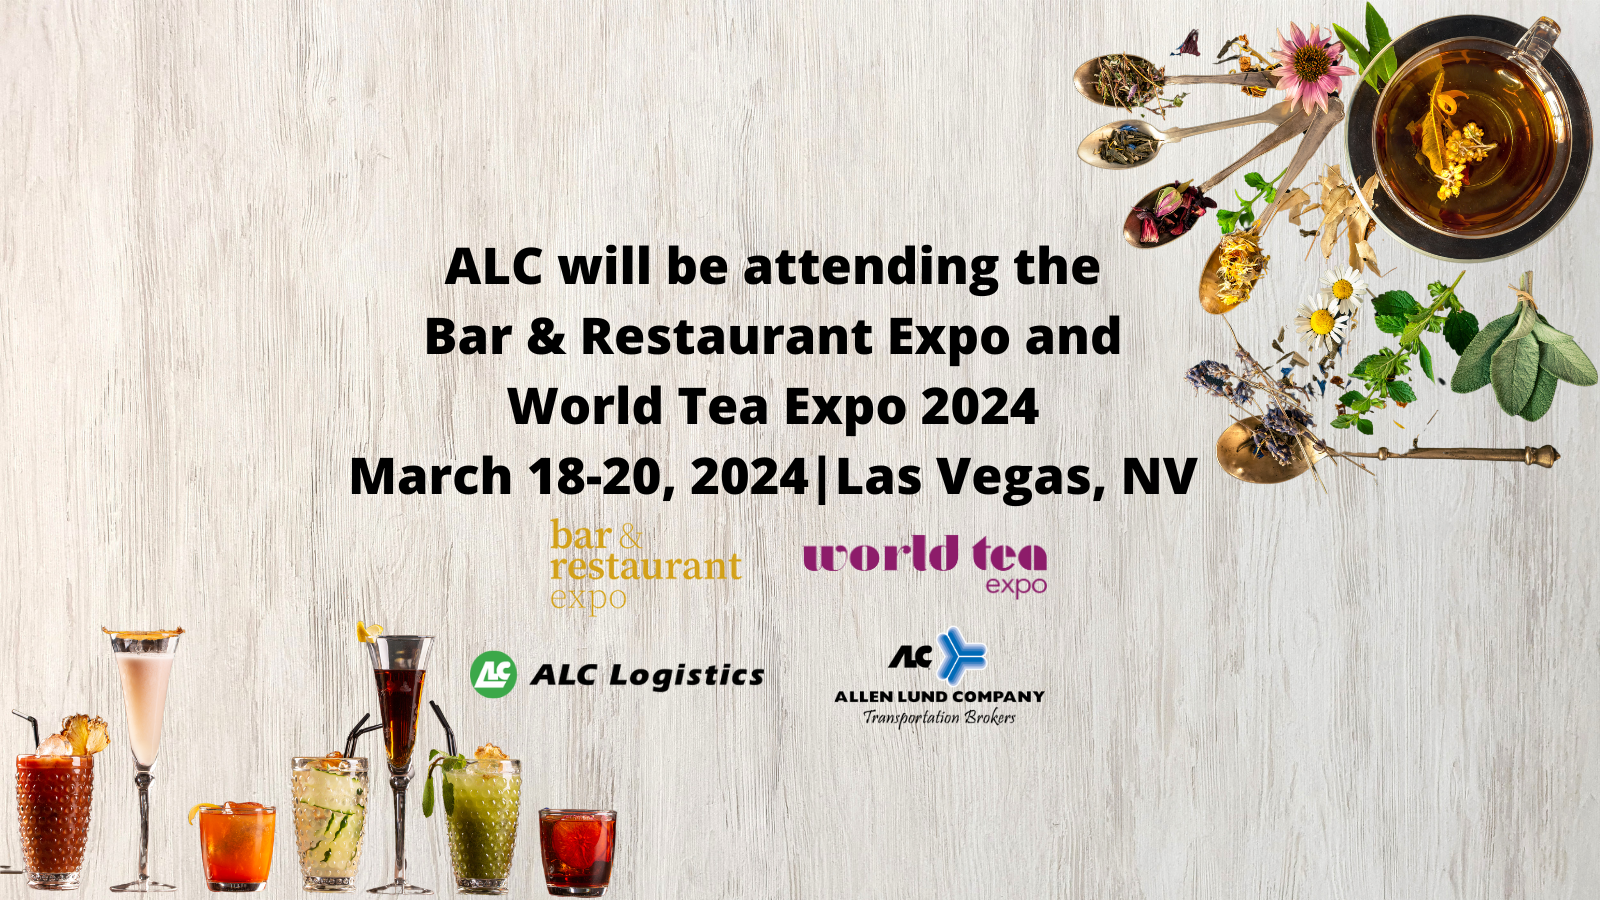 ALC will be attending the Bar & Restaurant Expo and World Tea Expo 2024